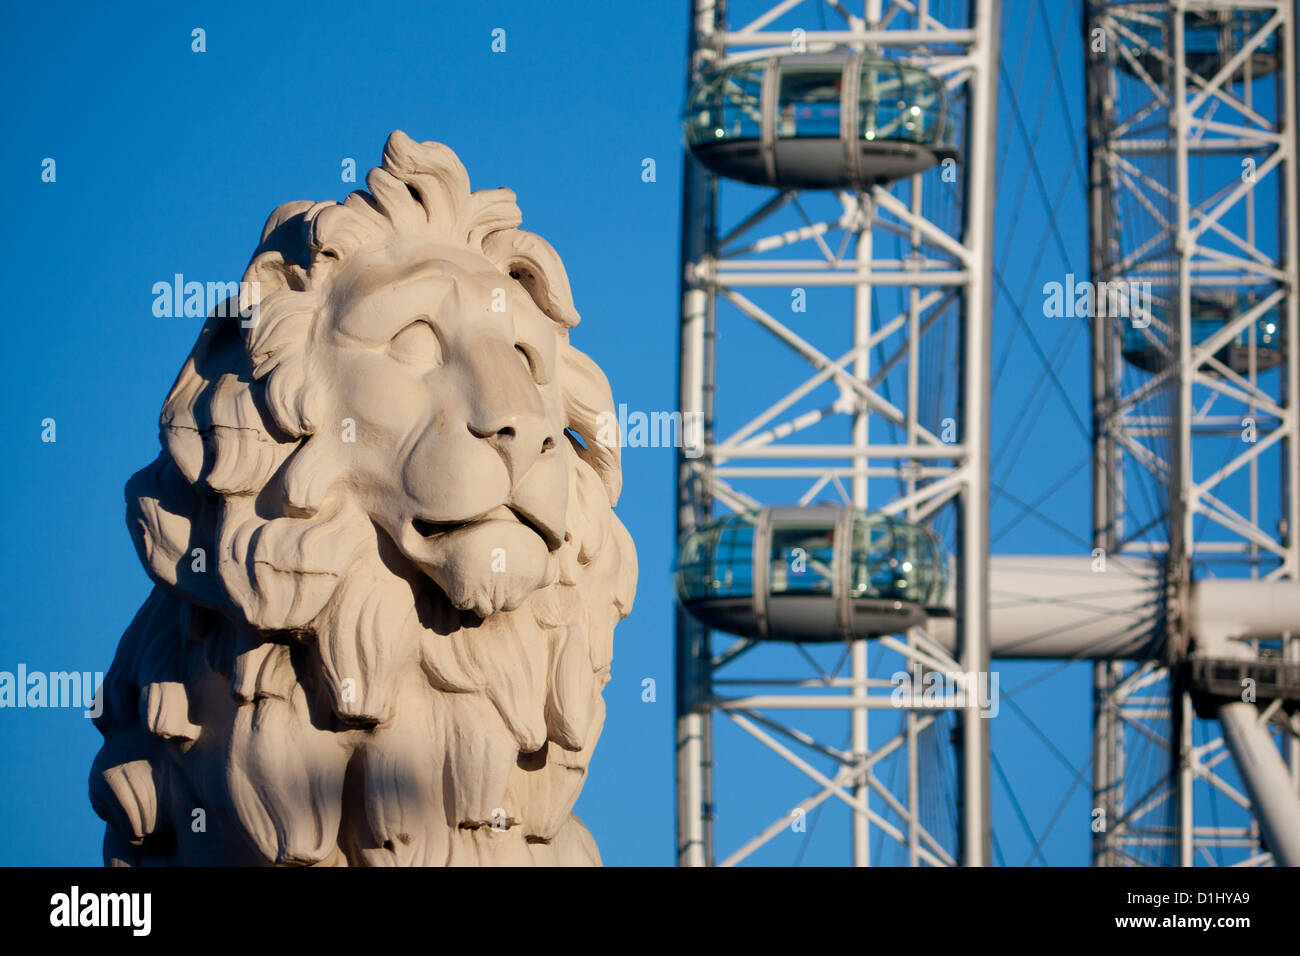 The South Bank Lion stone sculpture with London Eye Millennium Ferris Wheel in background London England UK Stock Photo